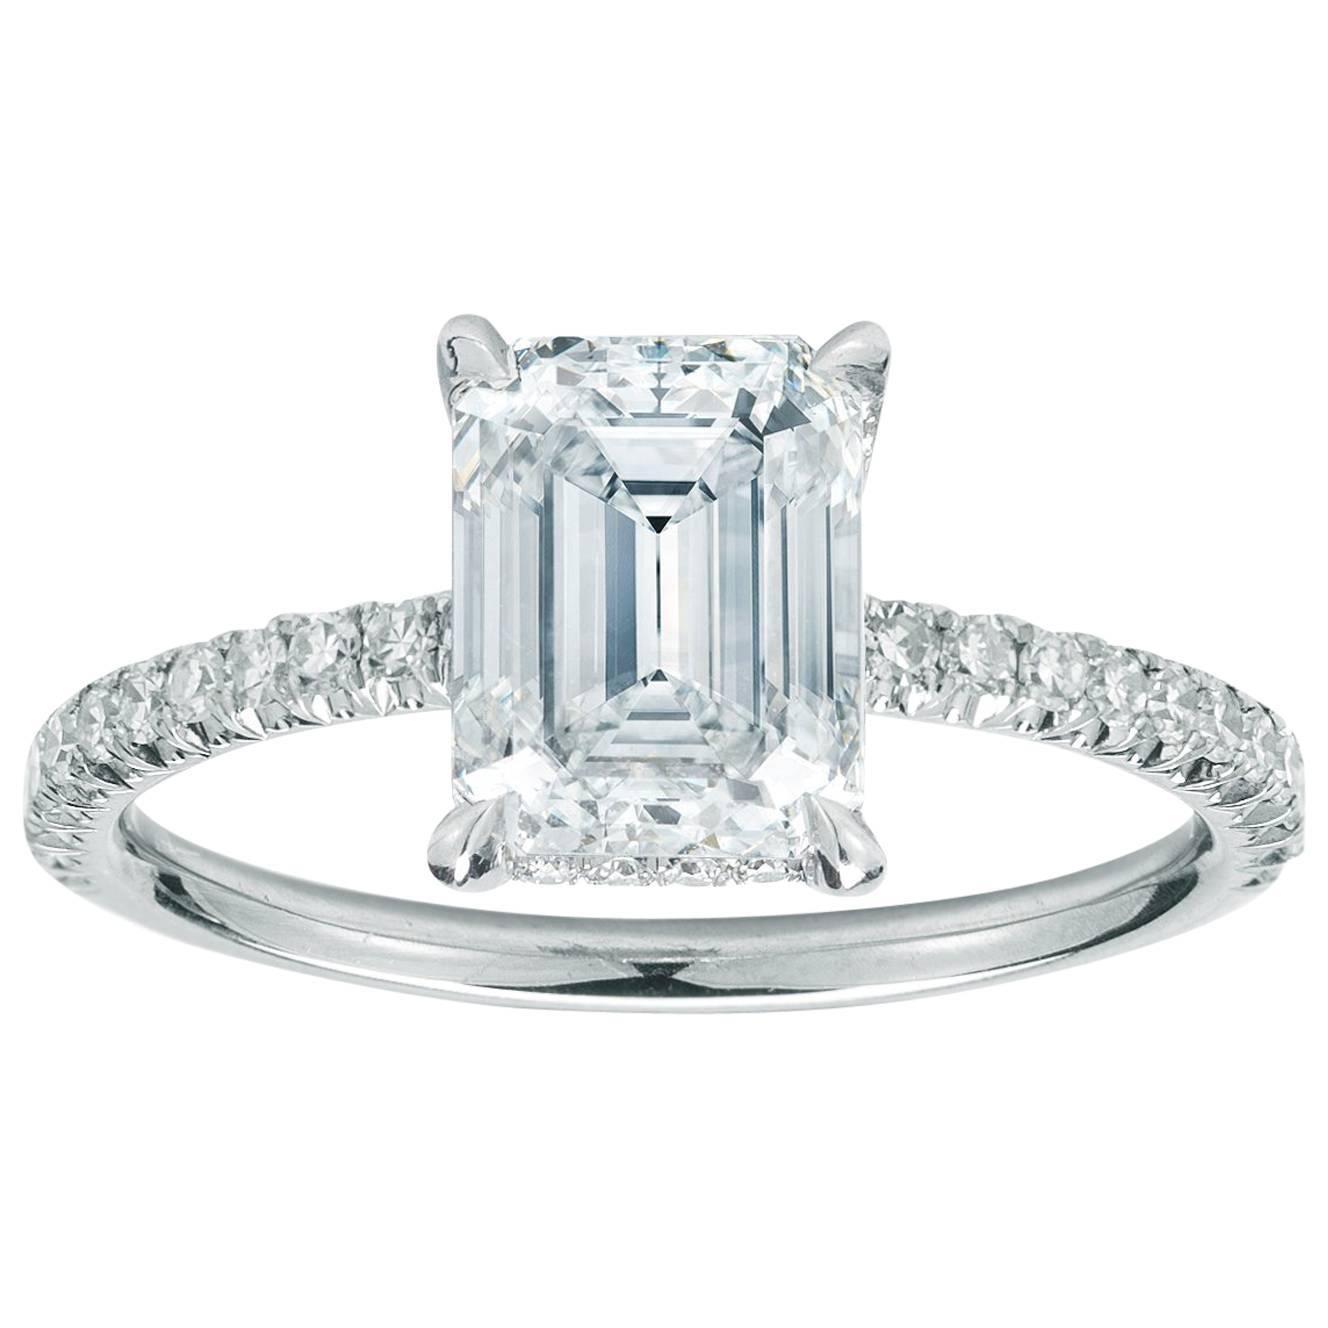 Marisa Perry Micro Pave 2.04 Carat Emerald Cut Diamond Engagement Ring For Sale